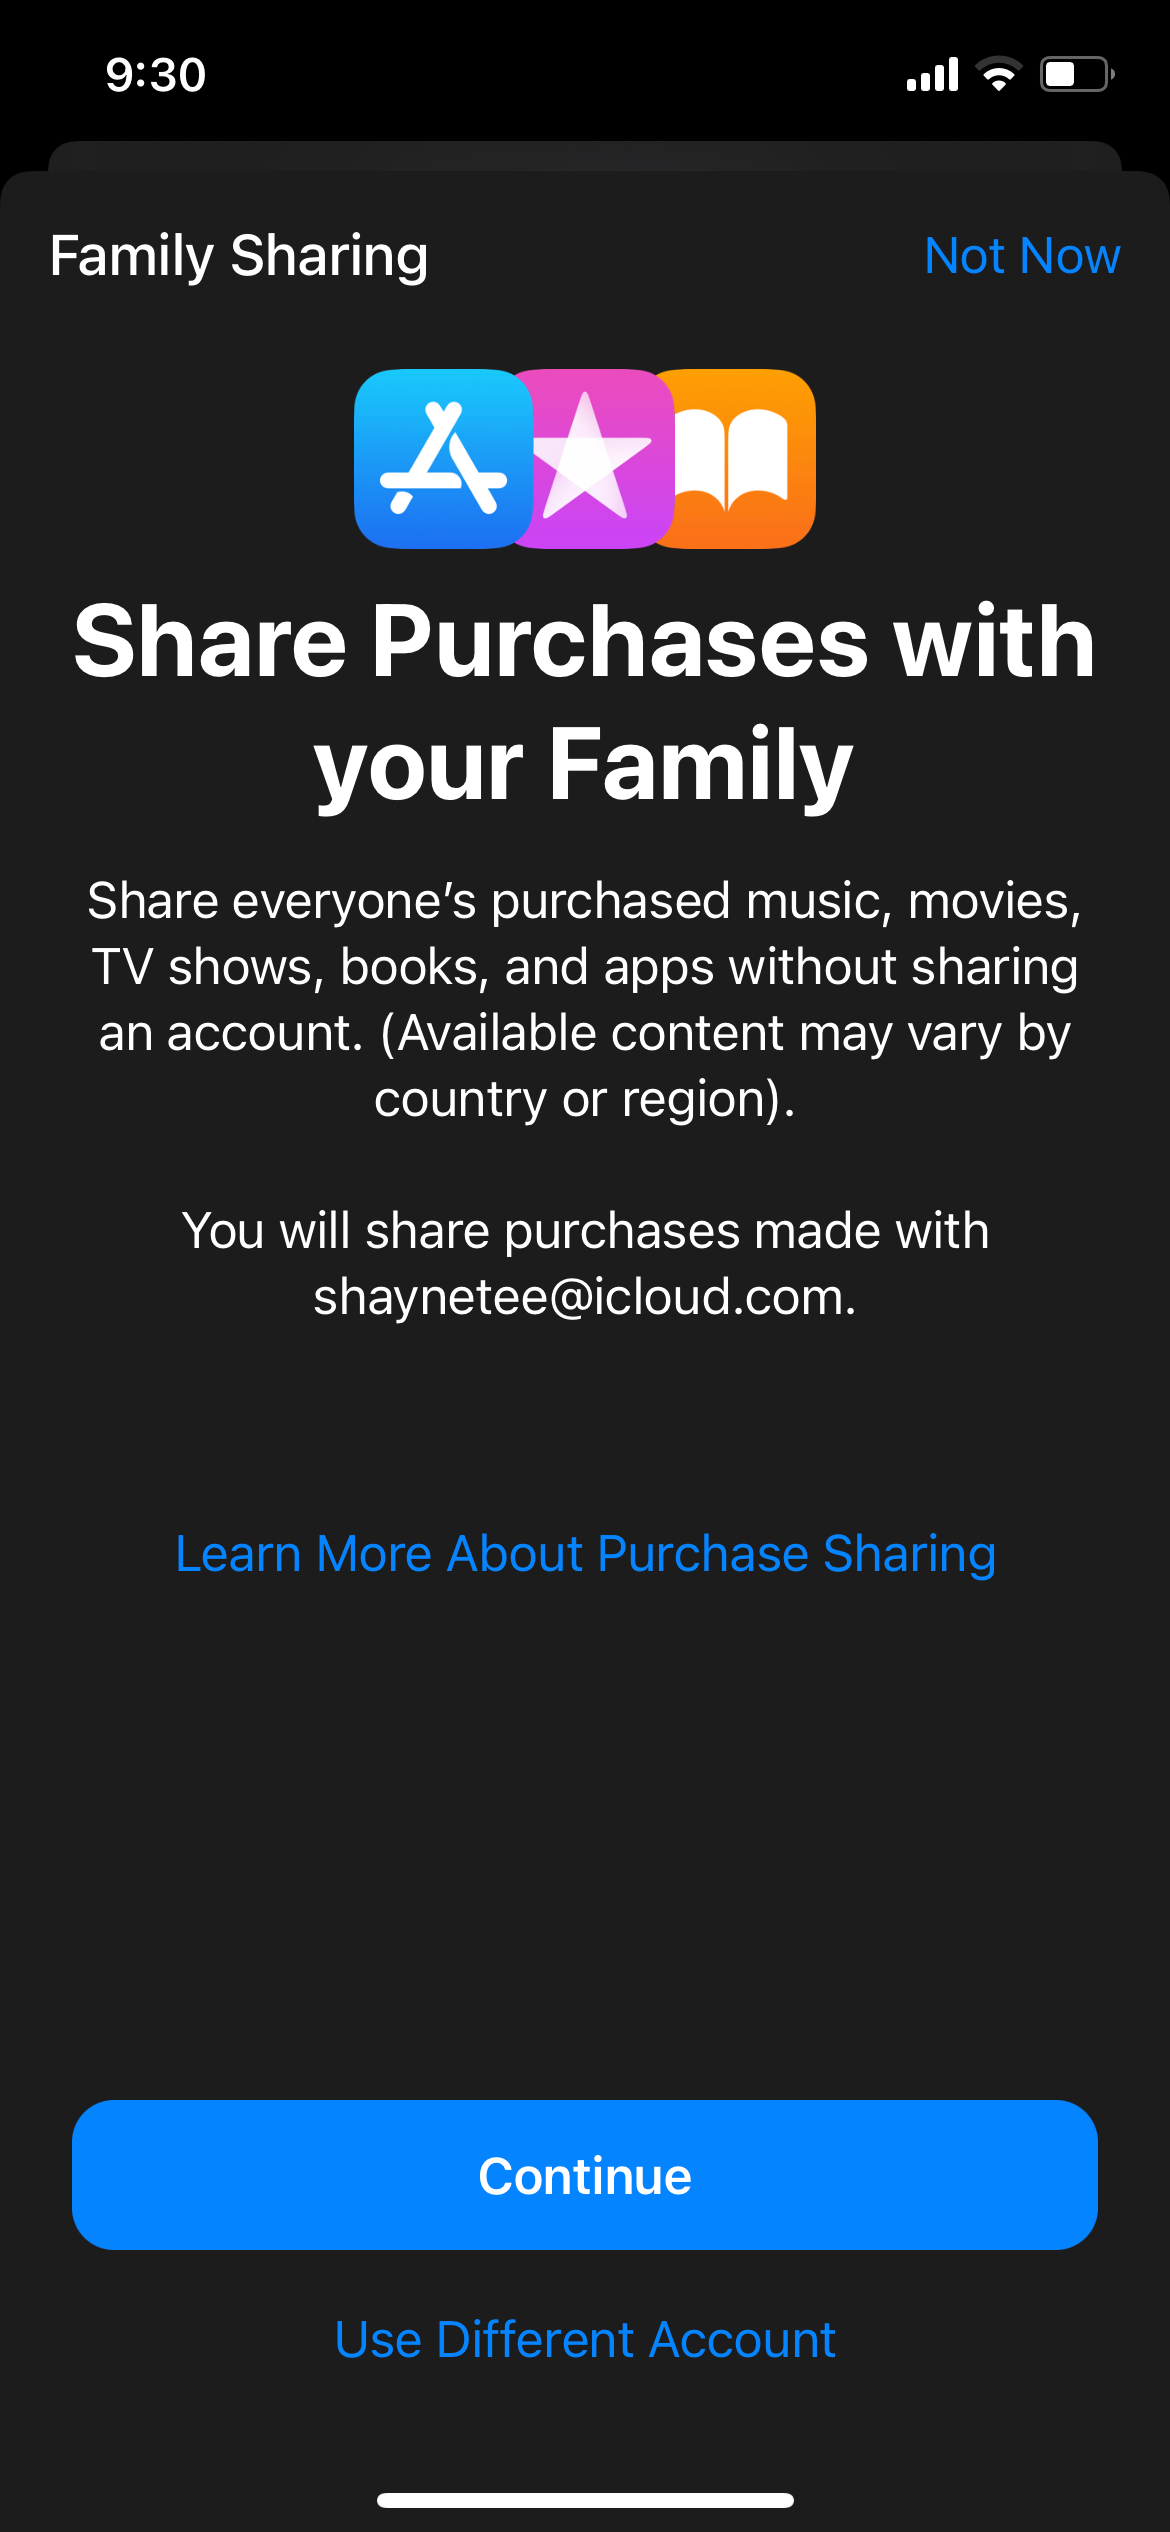 Prompt from iPhone to Share Purchases with Family